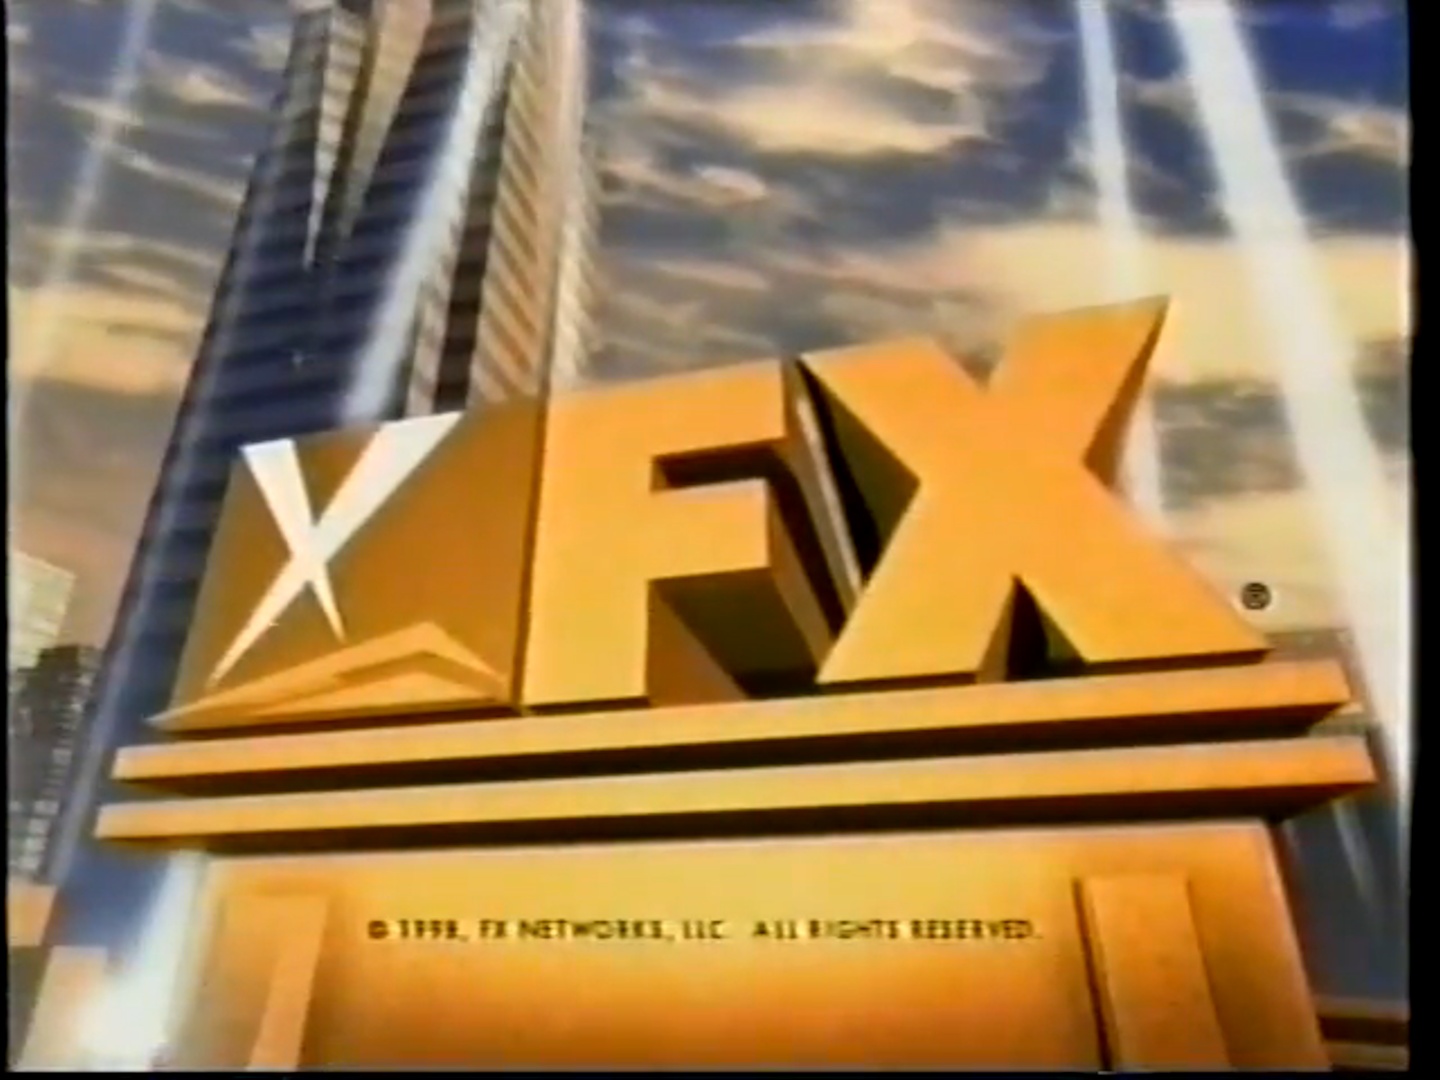 FX Network logo (1994). Click here to see the source.